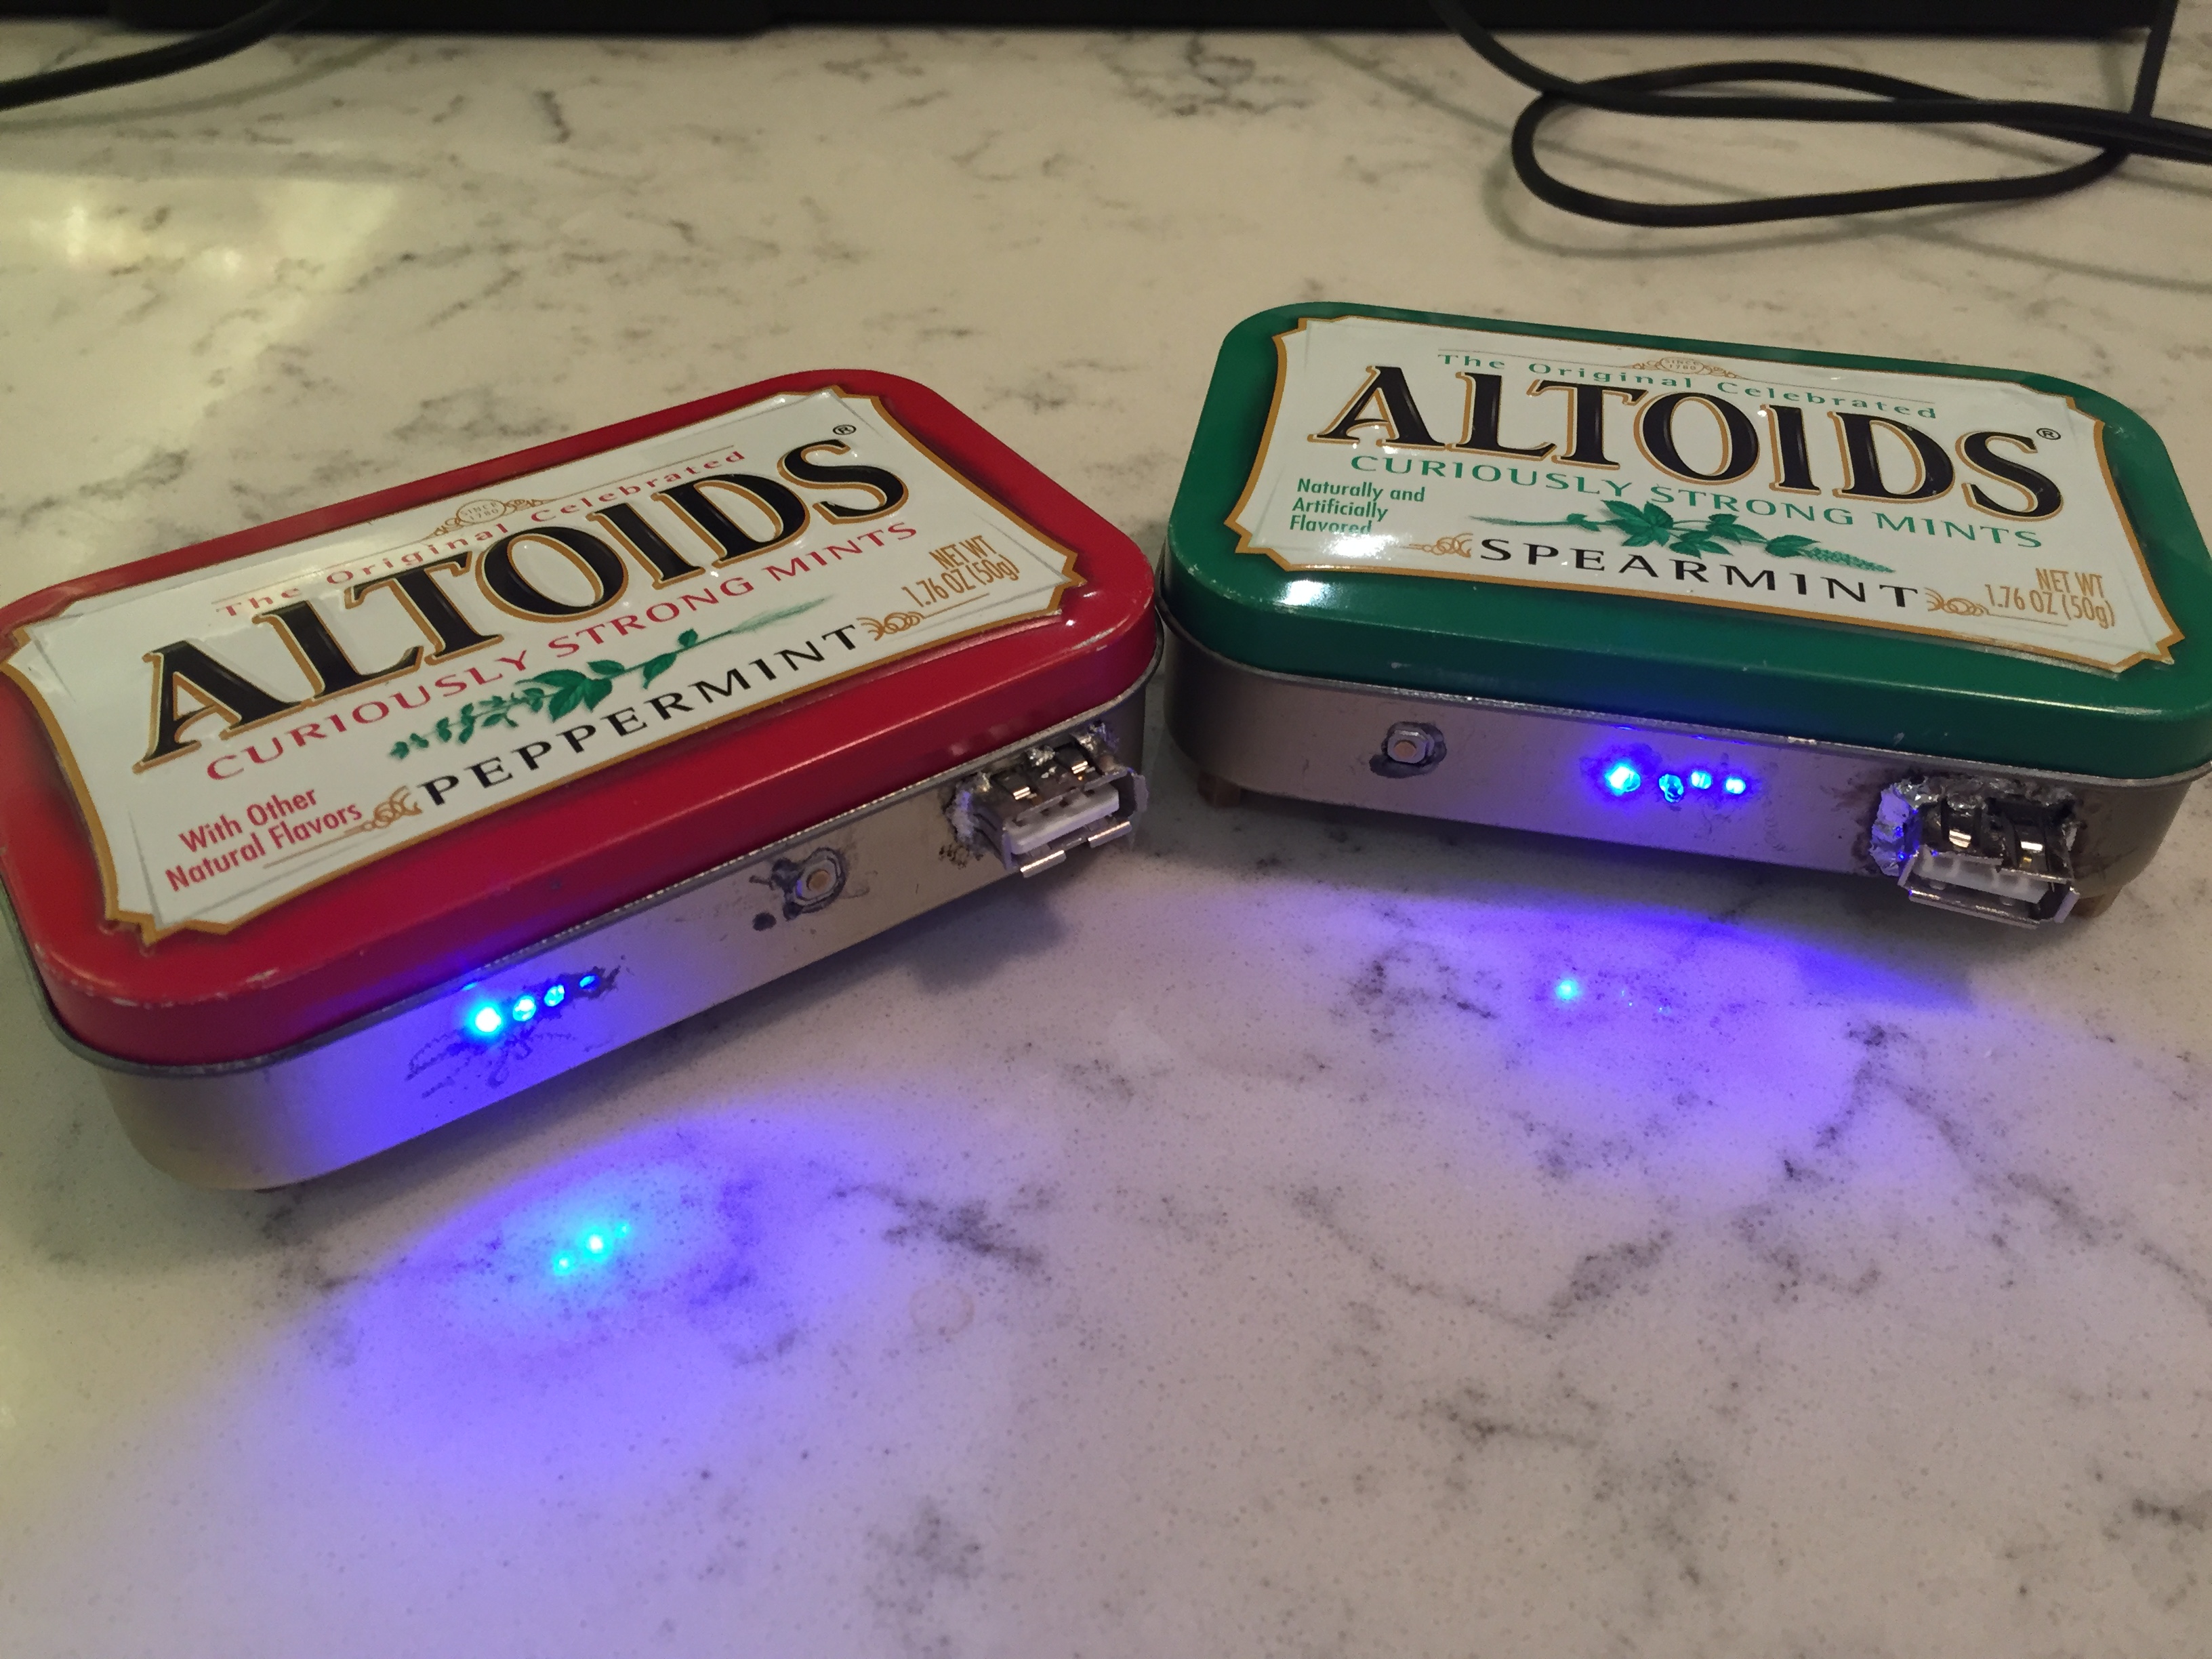 Meet The Altoids Builds (Click here to get started)